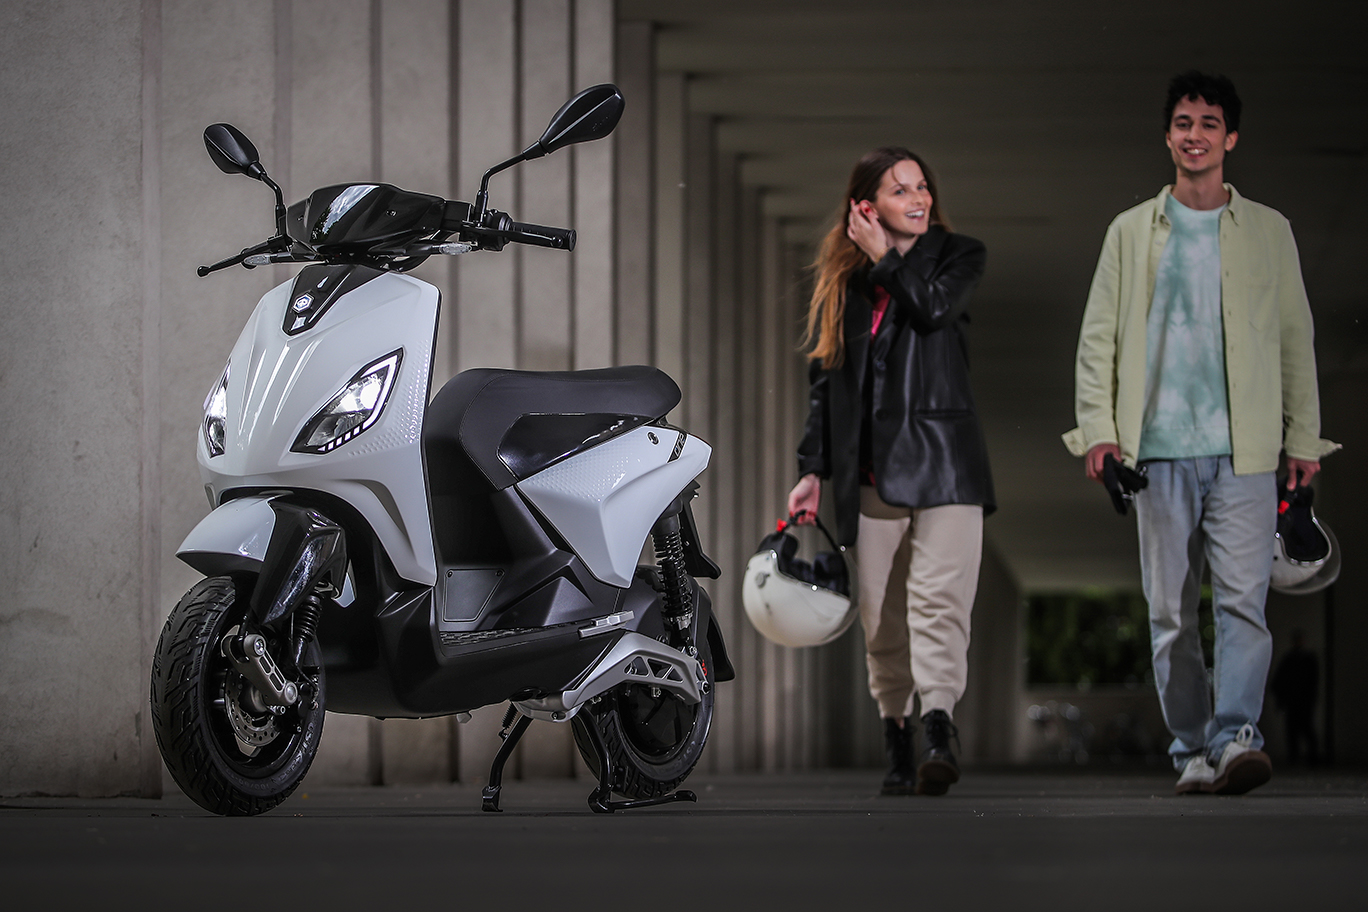 jøde film melodramatiske Piaggio 1+ Electric Scooter: Price, Range & Specifications - E-Vehicleinfo